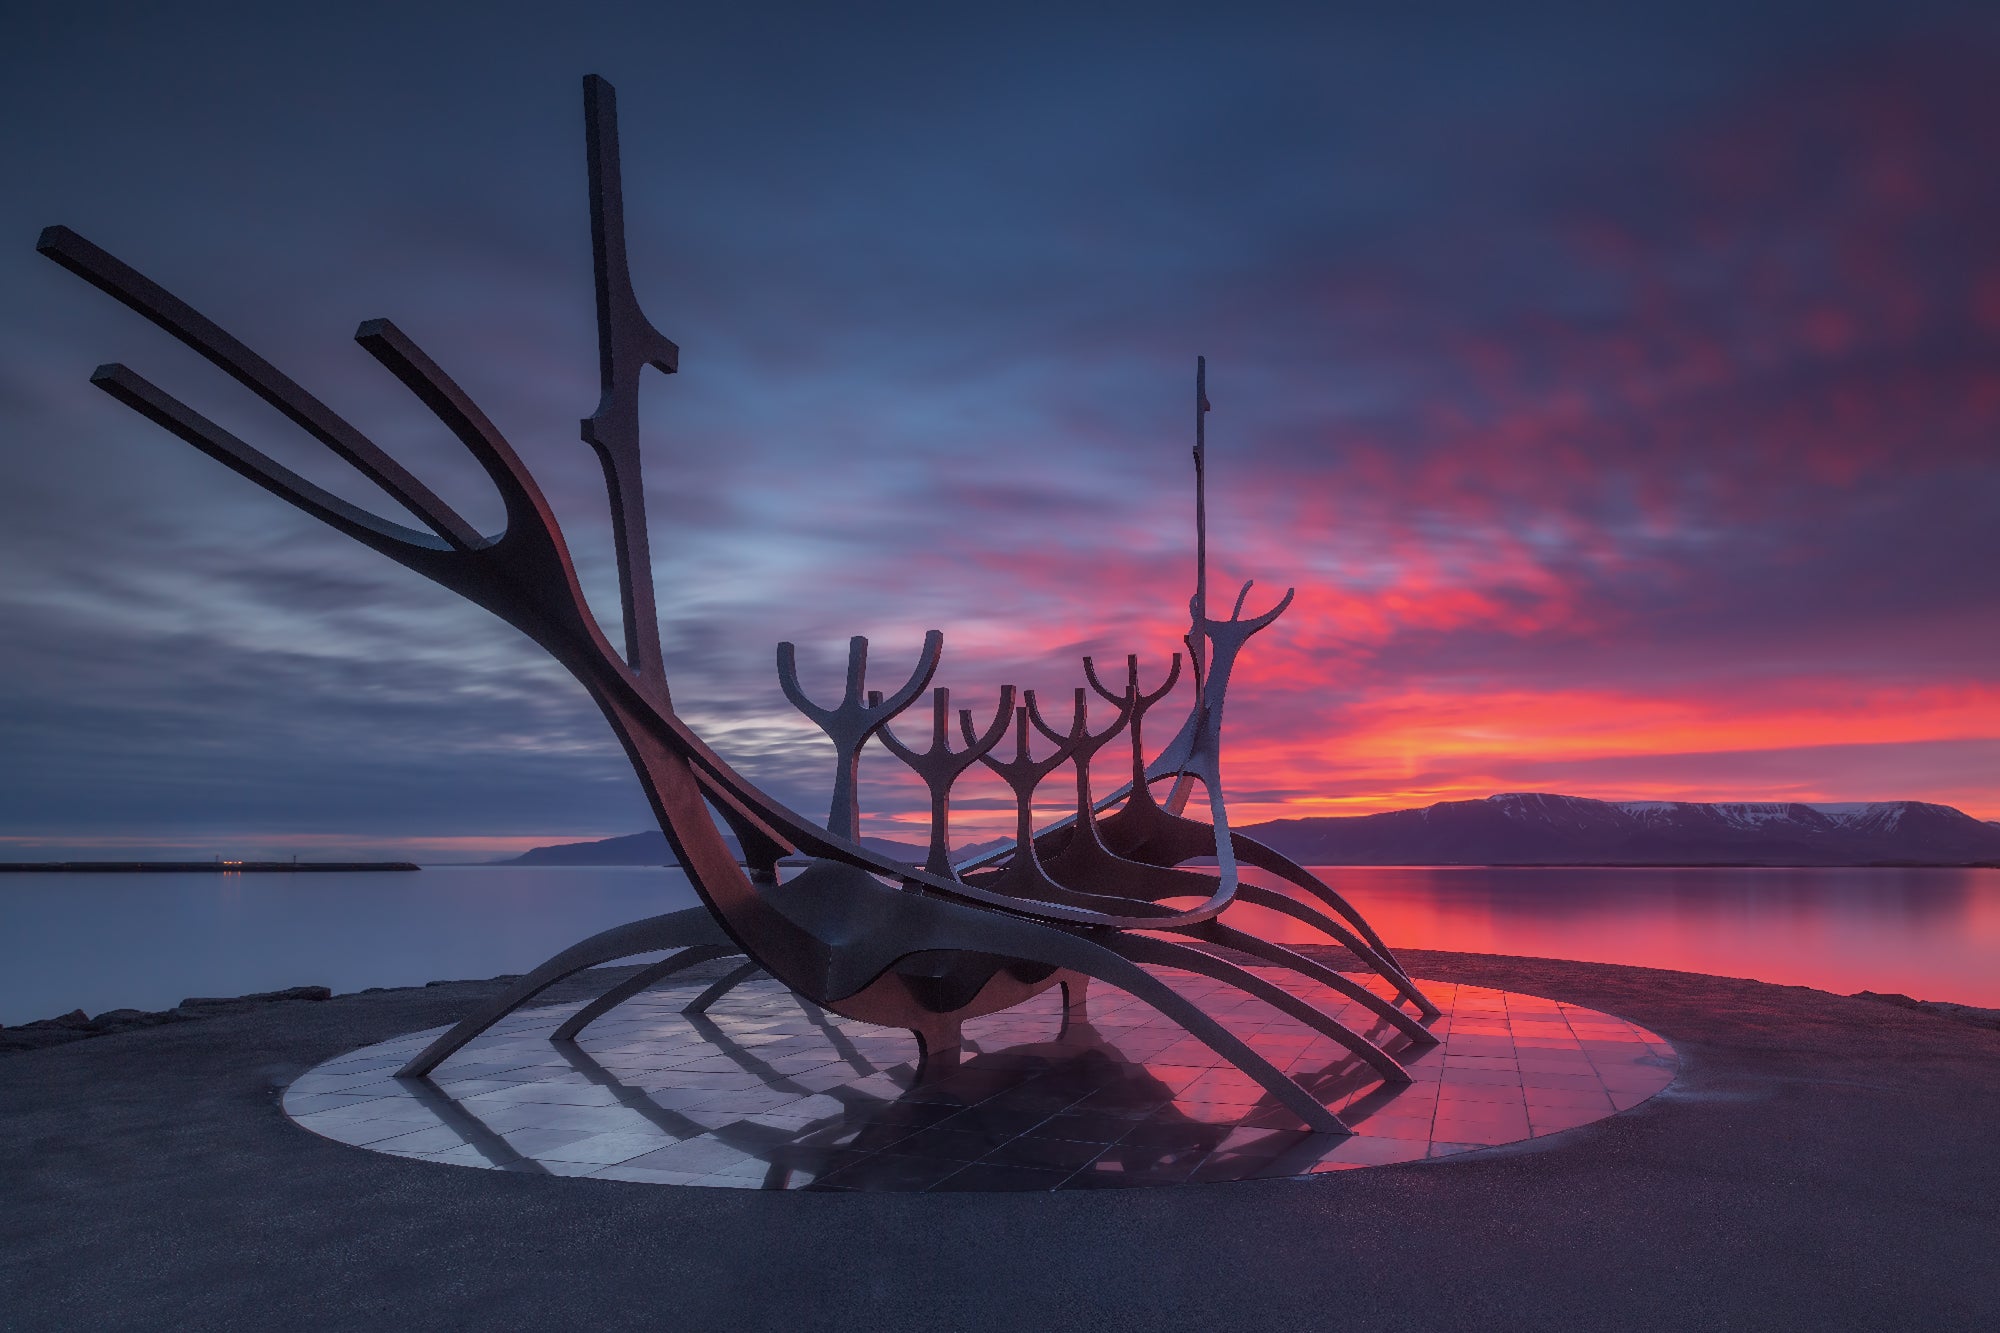 Sun Voyager s image